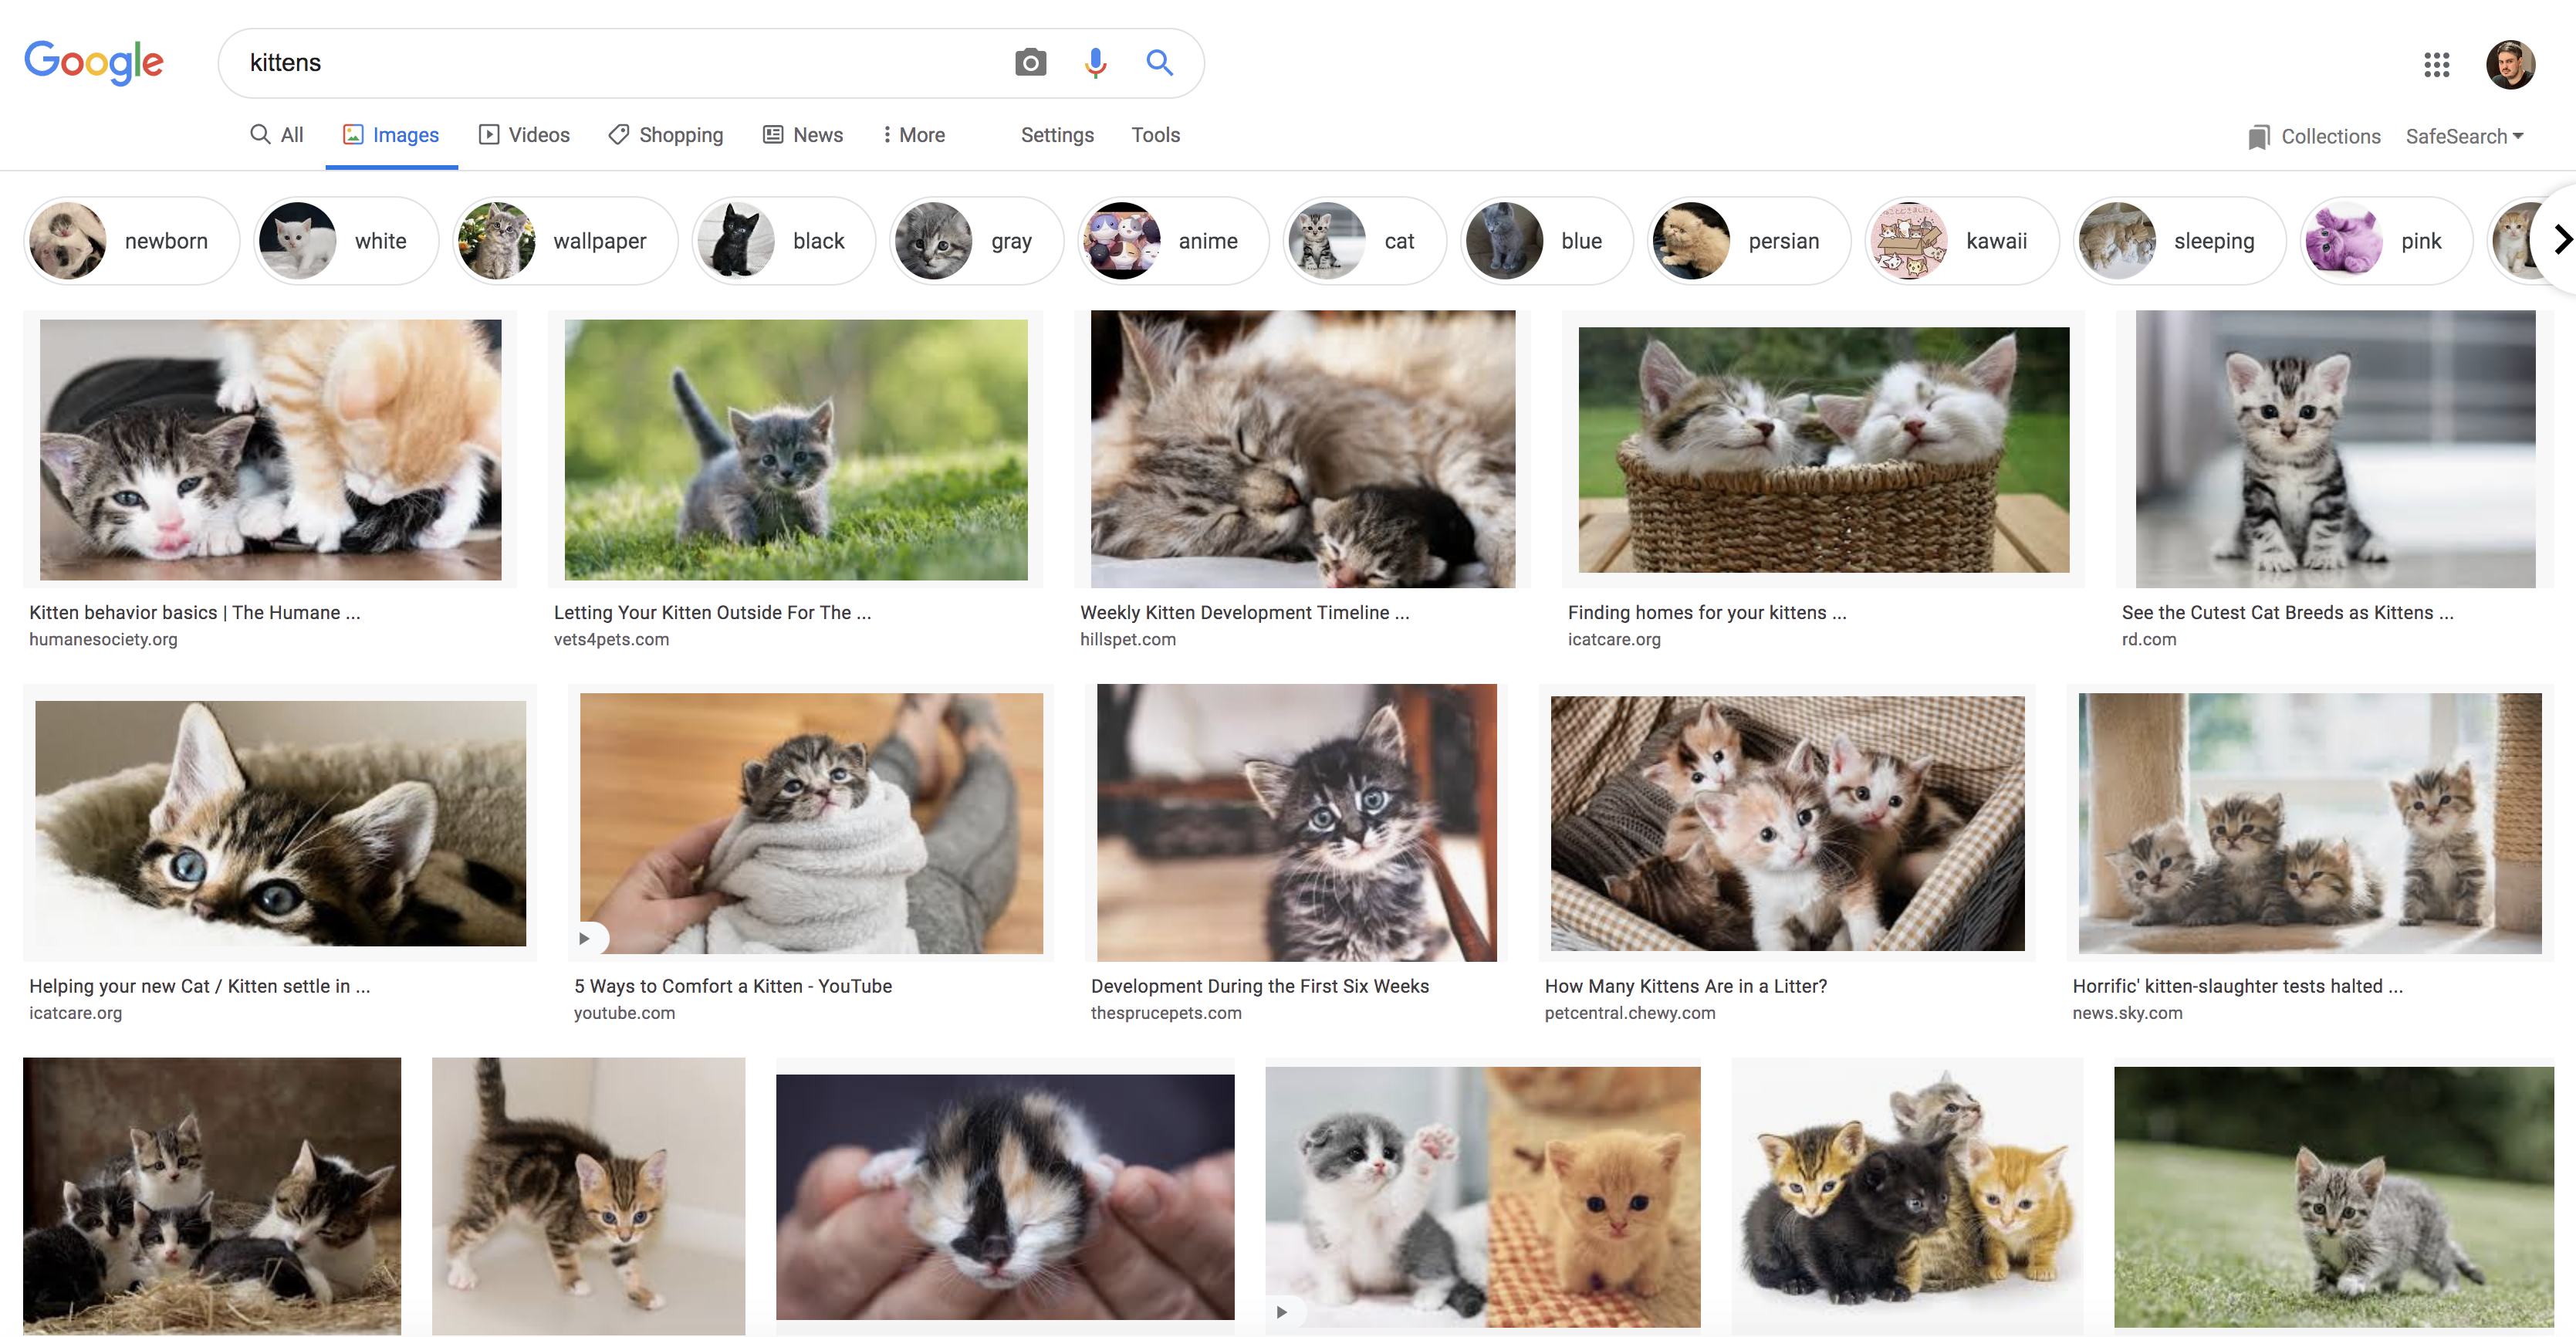 google image search example